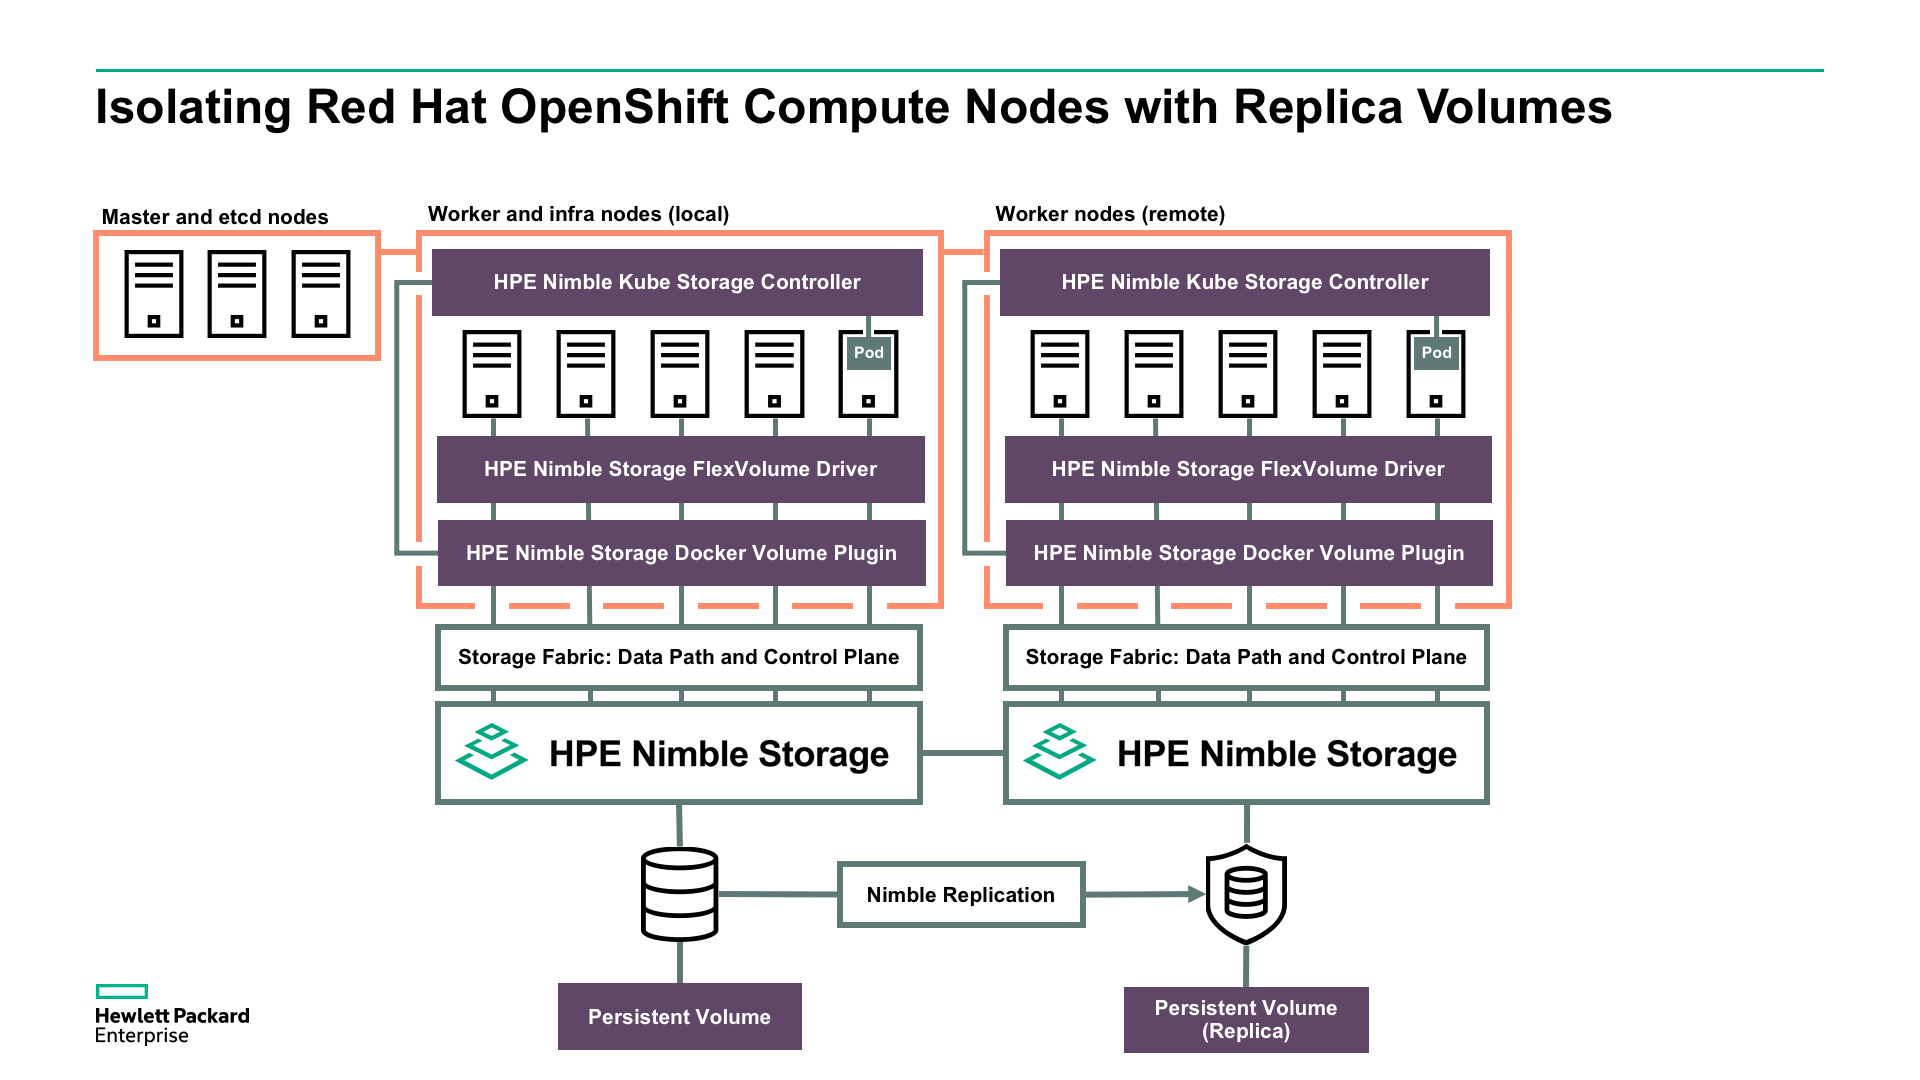 Red Hat OpenShift Nodes with HPE Nimble Storage replica volumes